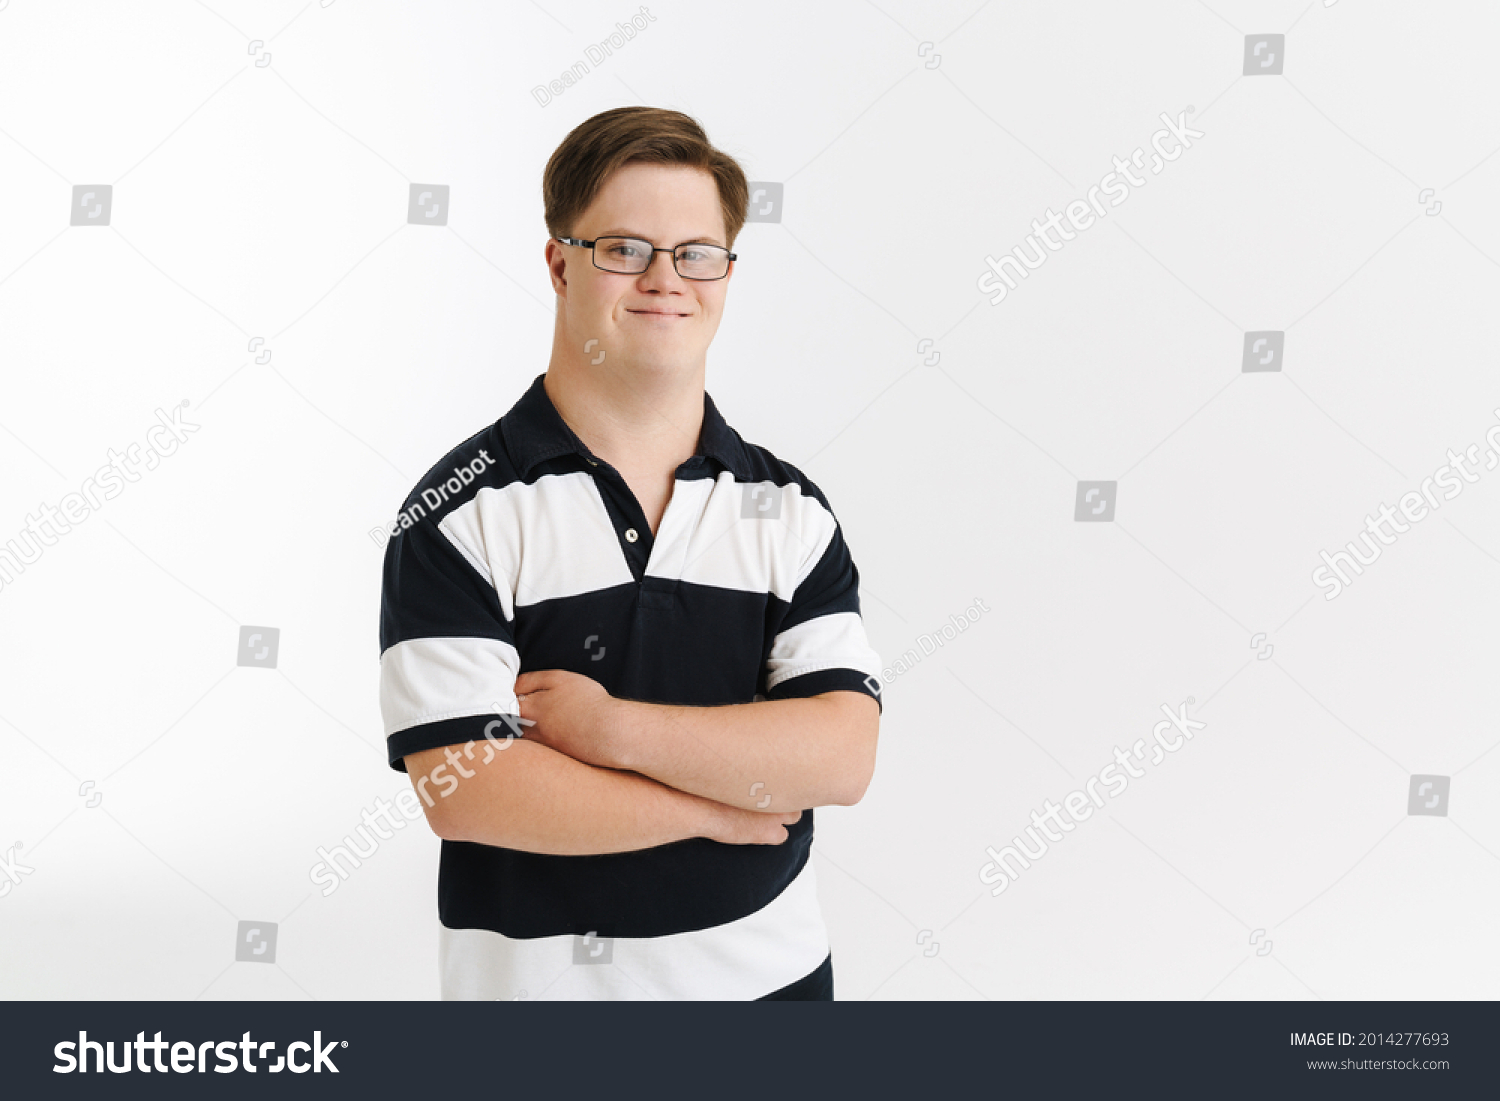 Young man with down syndrome smiling and looking at camera isolated over white background #2014277693